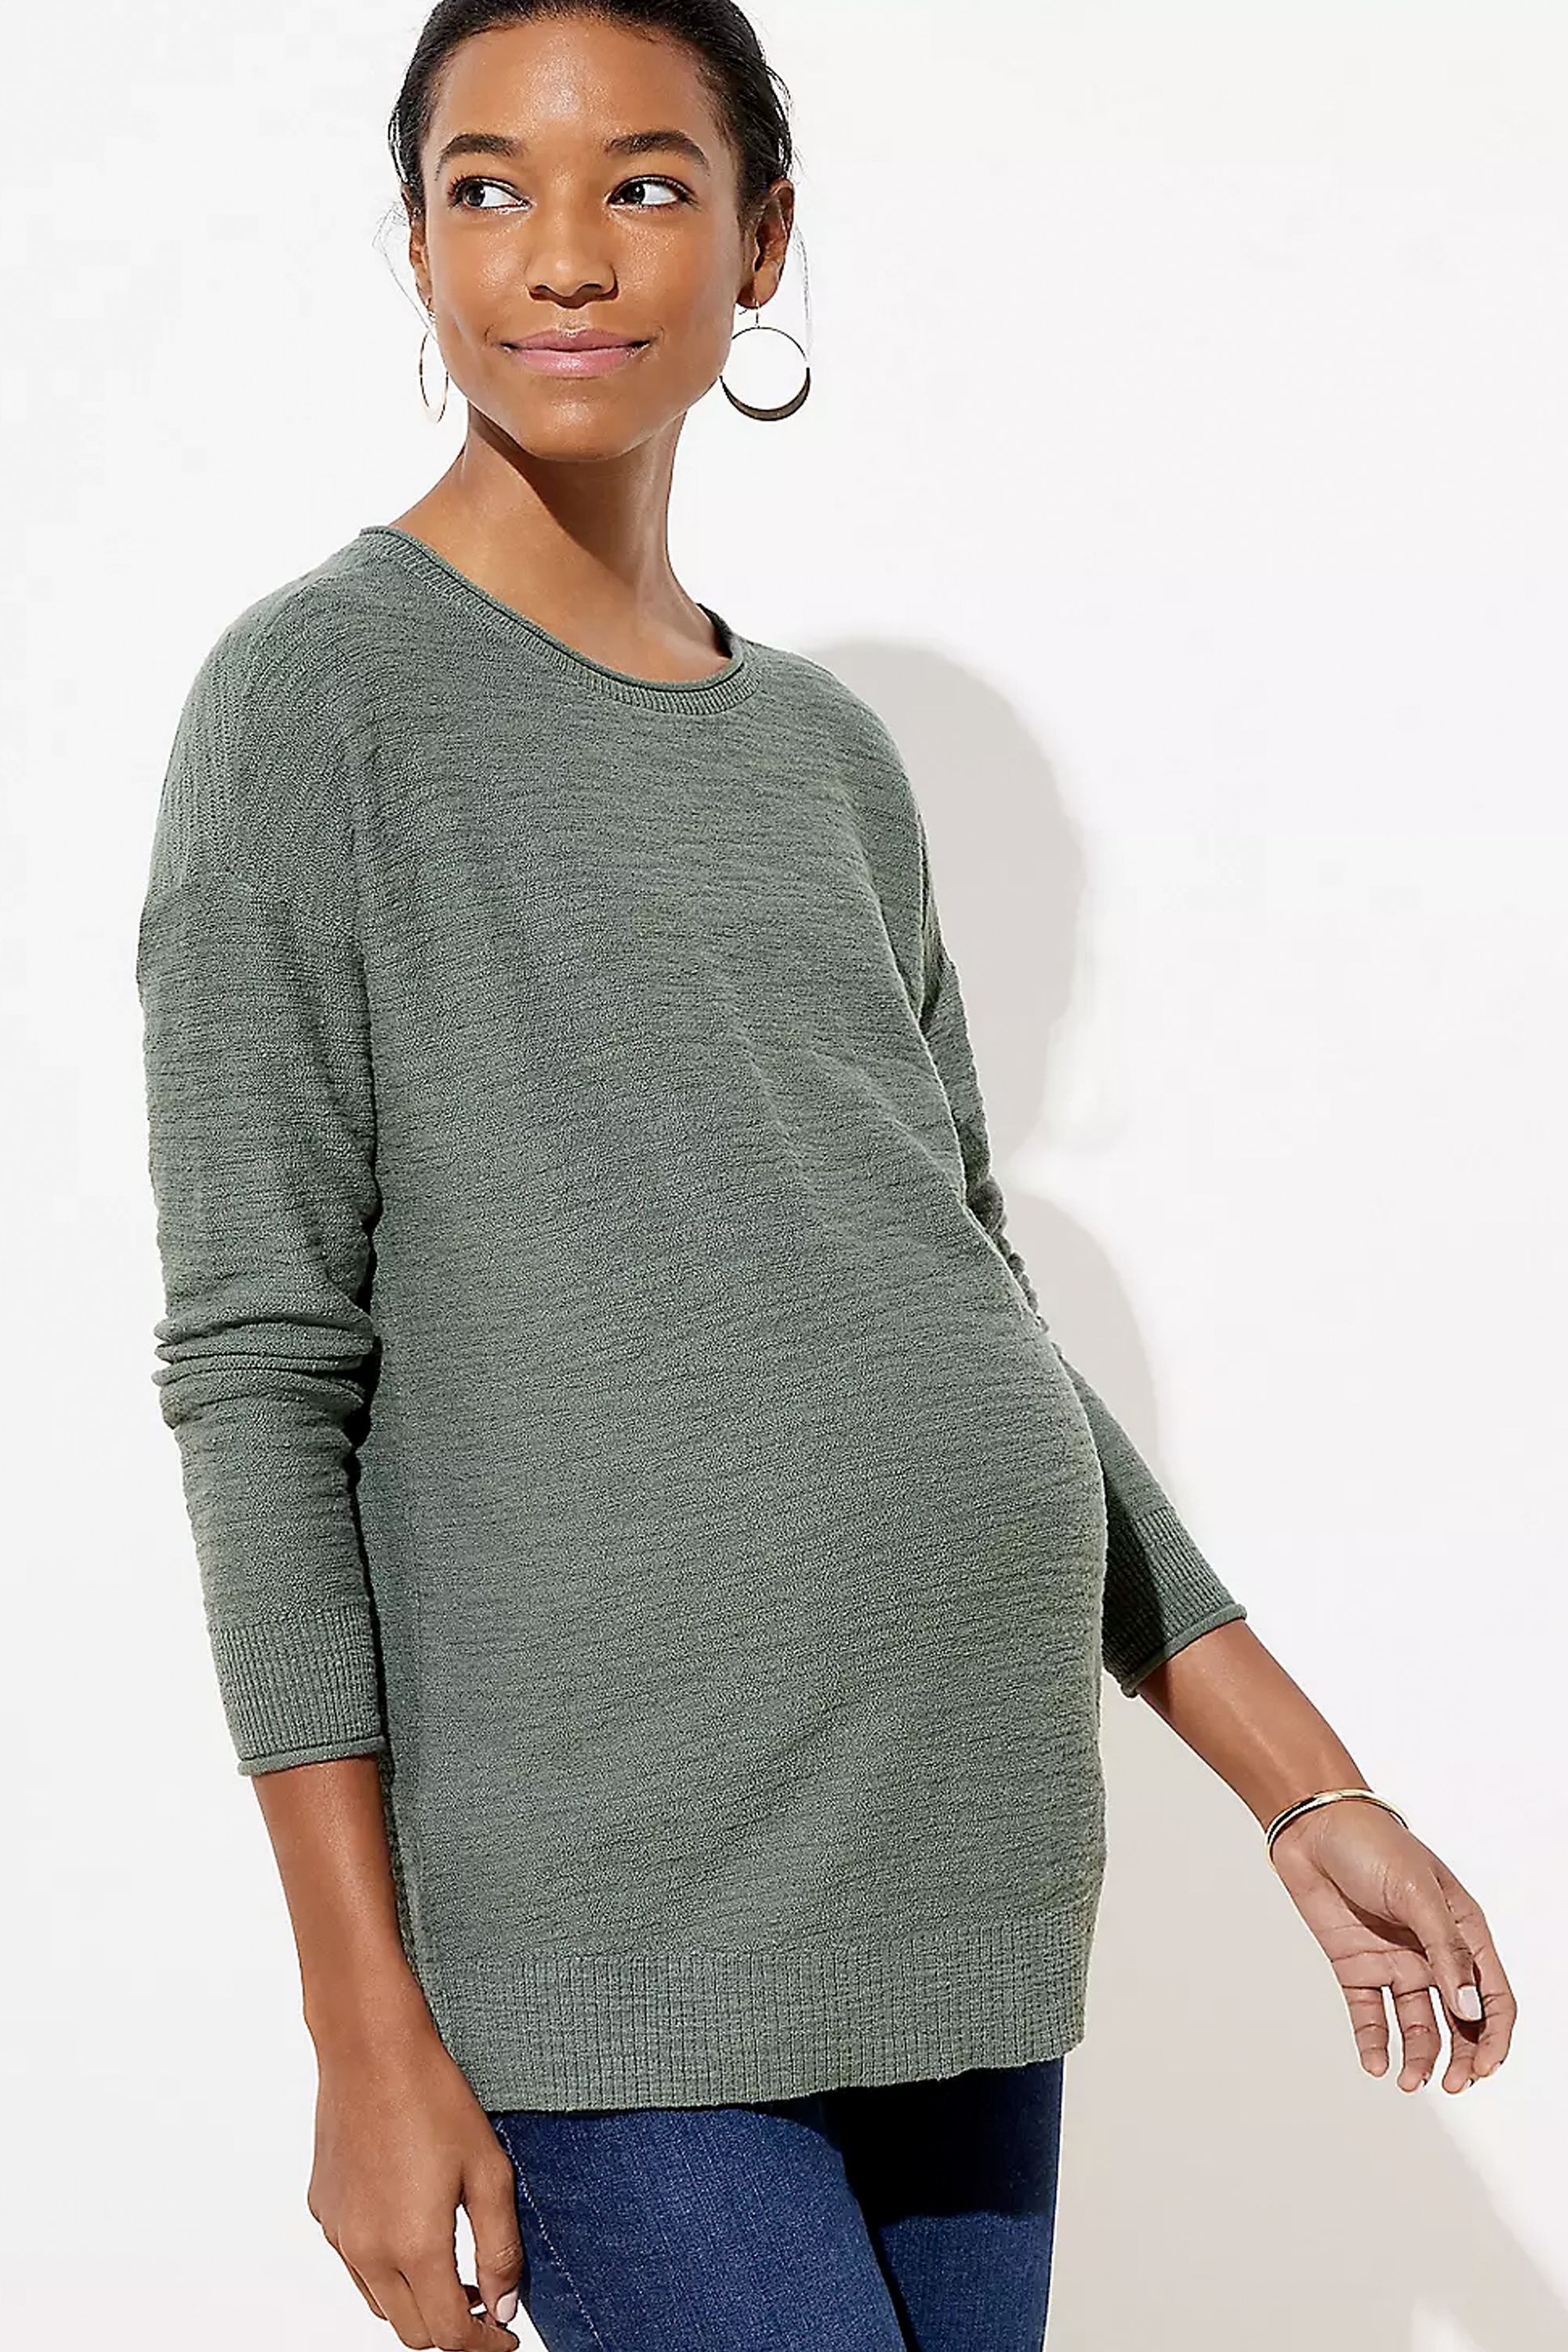 Cute Clothes and Stores to Shop 2021 — Best for Pregnancy